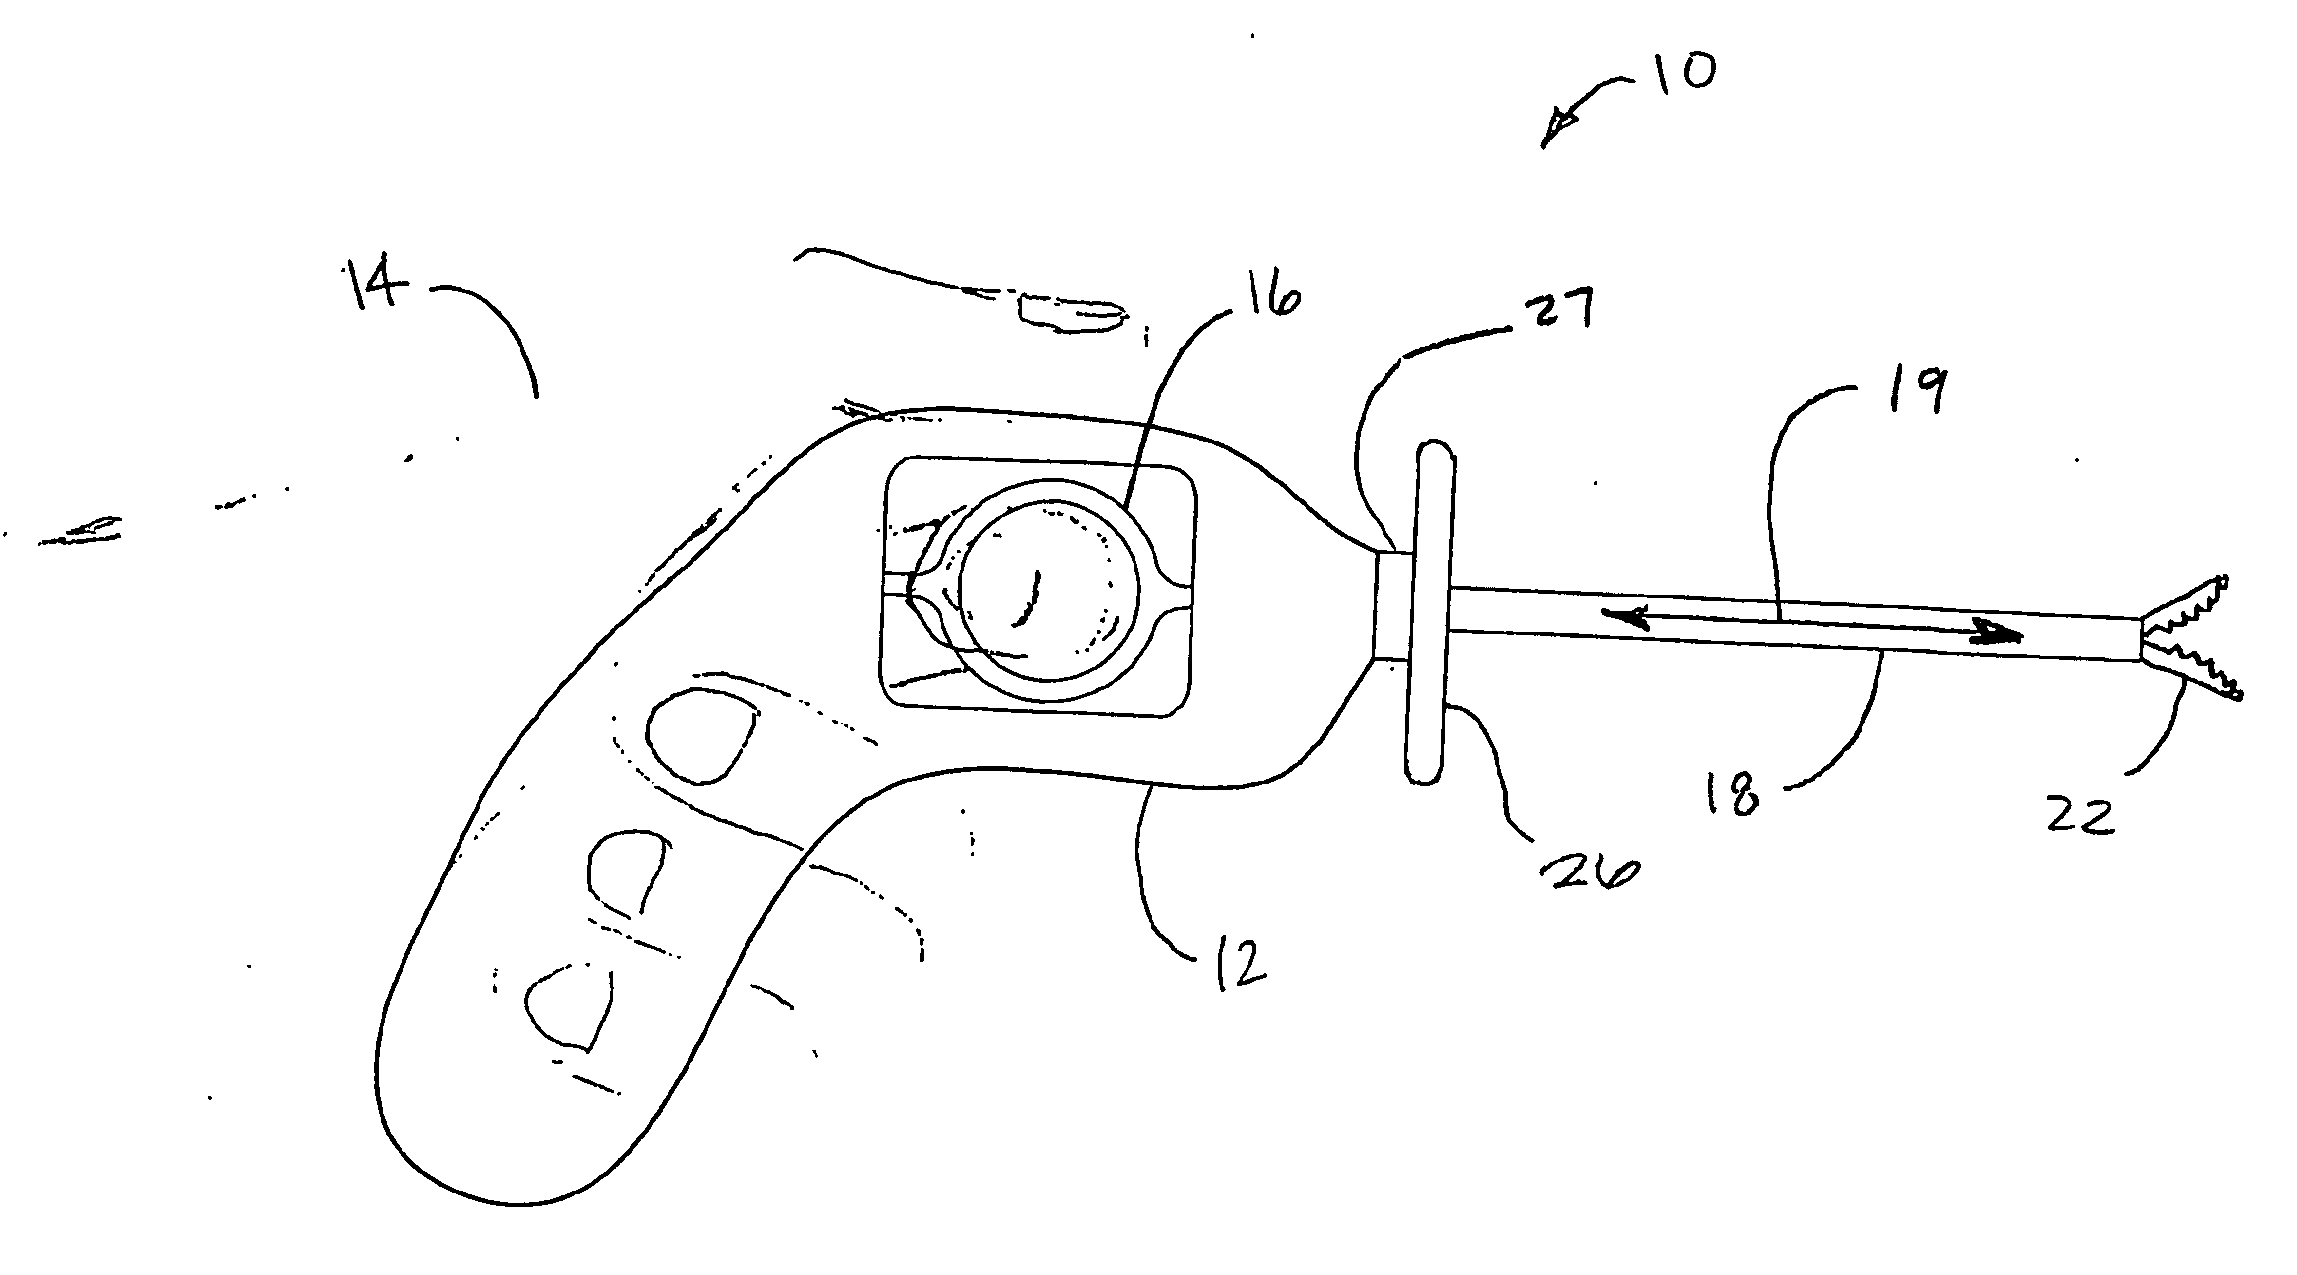 Surgical instrument with trigger control